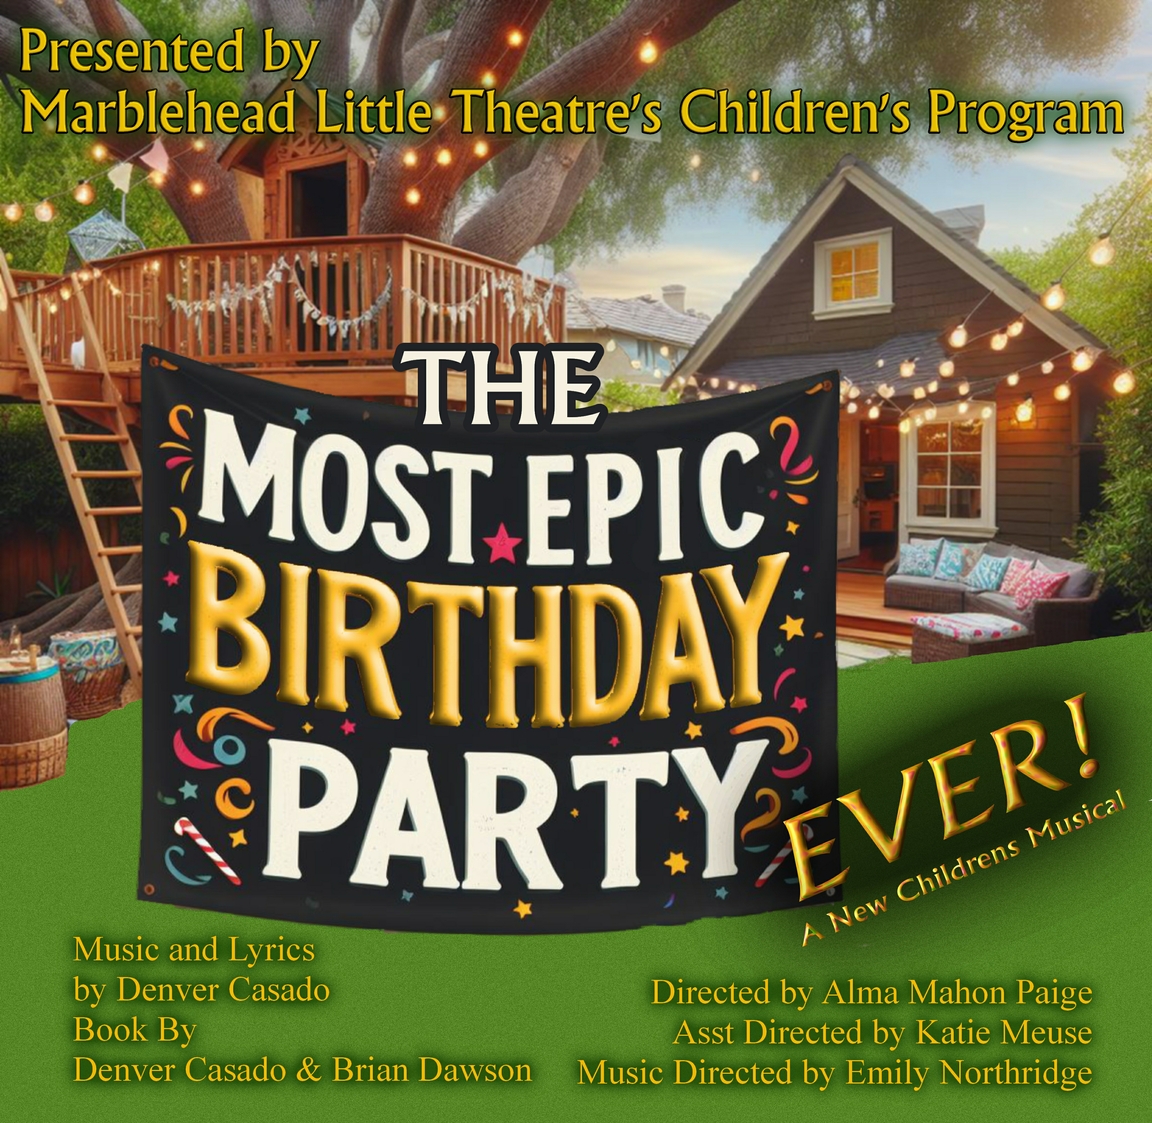 Introducing "The Most Epic Birthday Party Ever," a captivating children's musical at Marblehead Little Theatre. Come along and join in the fun created by our exceptional children's program — an experience your kids will love!